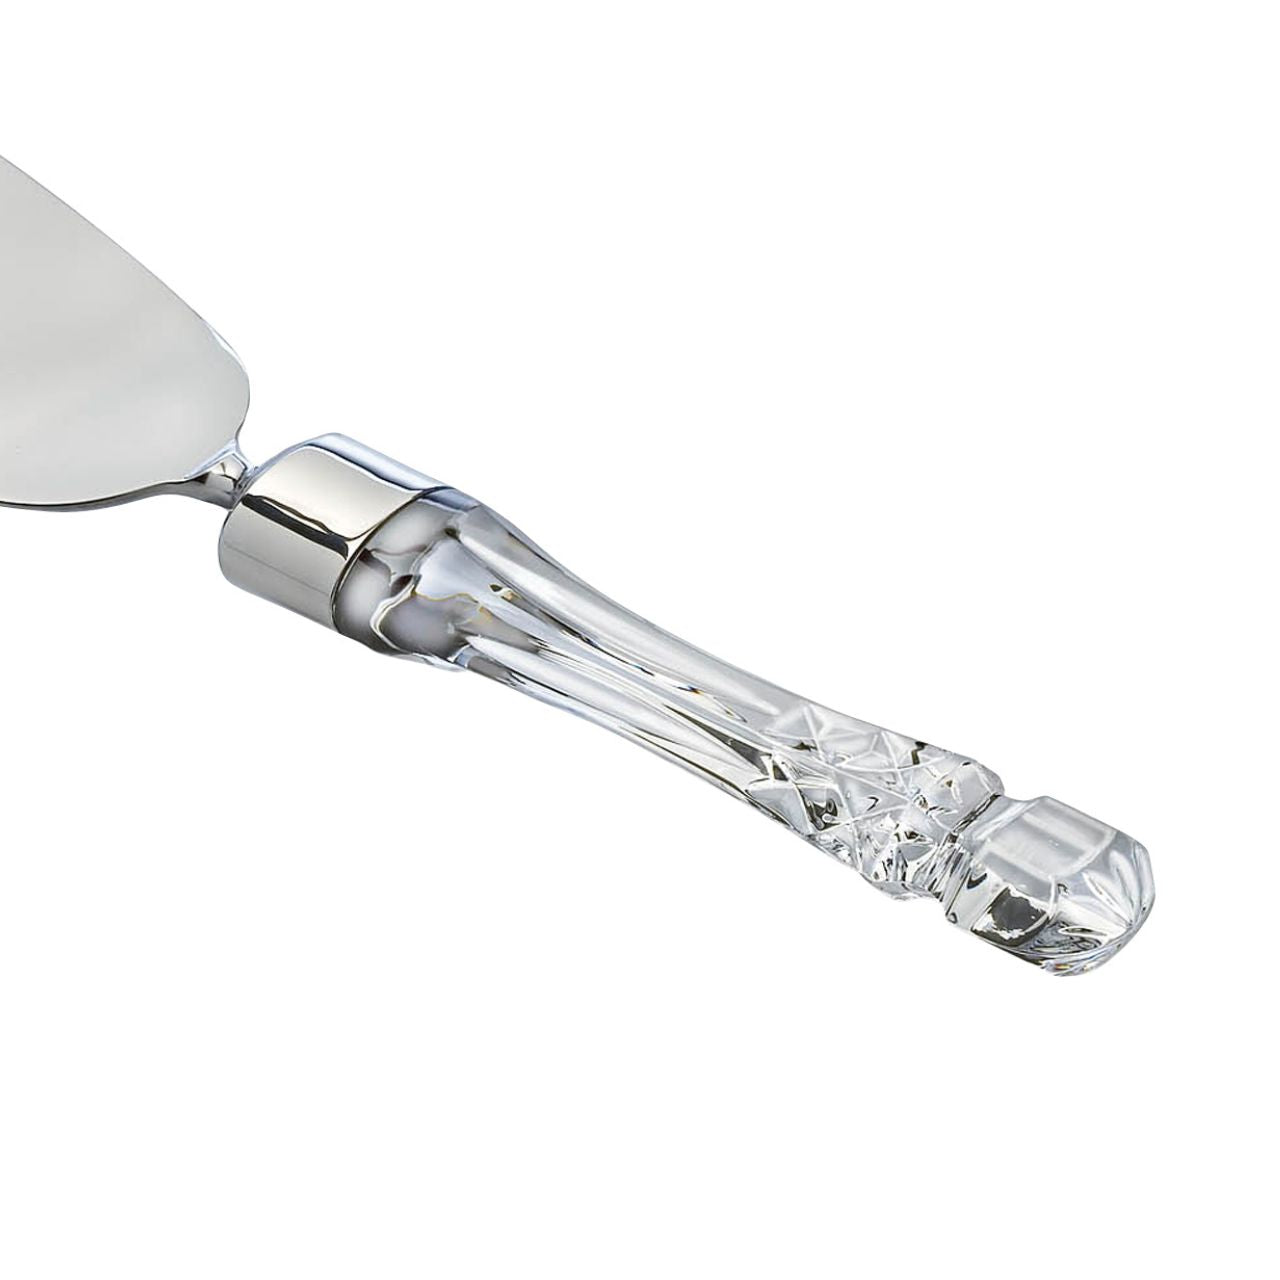 Lismore Cake Pie Server by Waterford  The Waterford Lismore pattern is a stunning combination of brilliance and clarity. A crystal keepsake to be treasured for years to come, the Lismore Cake/Pie Server features an elegant, fine crystal handle intricately detailed in Lismore's signature diamond and wedge cuts.